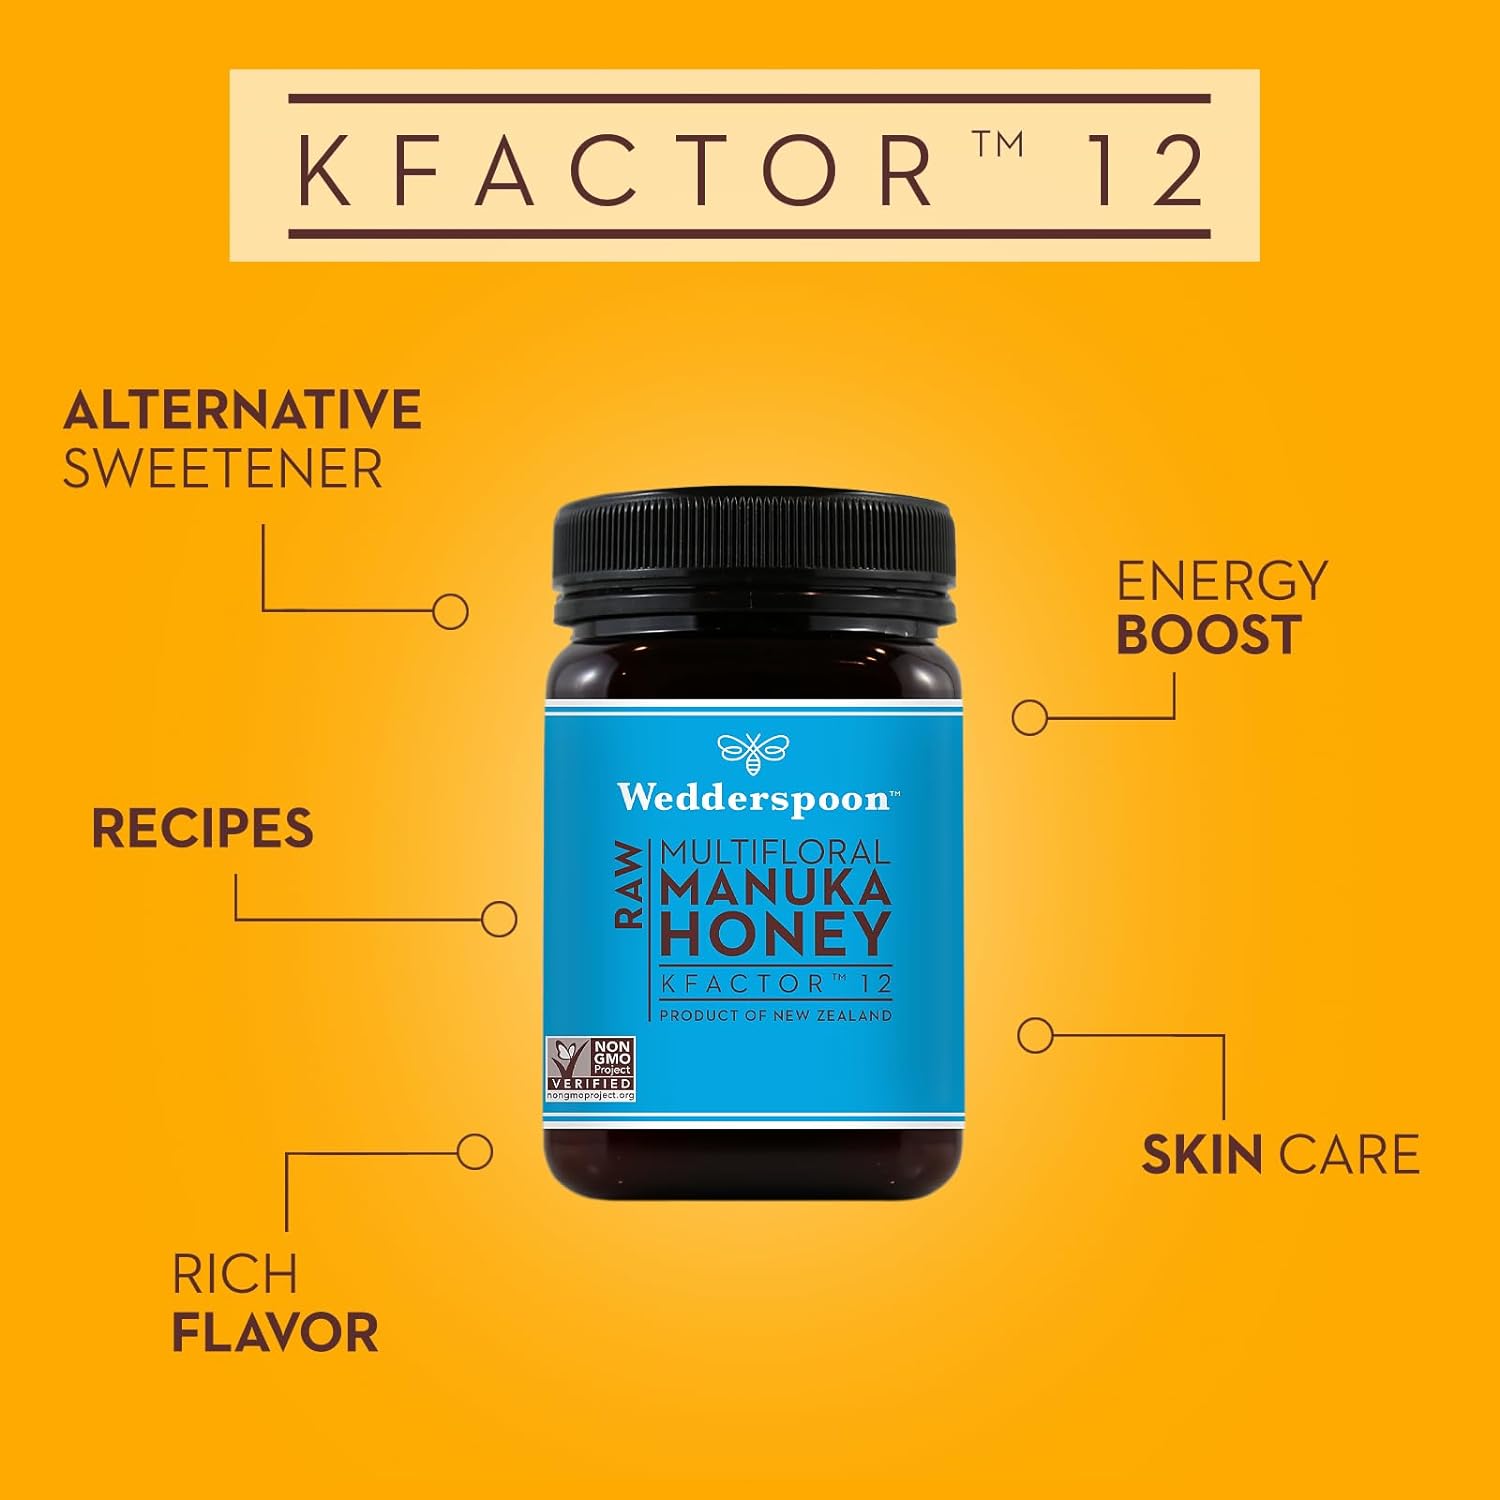 Wedderspoon Raw Premium Manuka Honey, KFactor 12, 17.6 Oz, Unpasteurized, Genuine New Zealand Honey, Non-GMO Superfood, Traceable From Our Hives To Your Home : Grocery & Gourmet Food